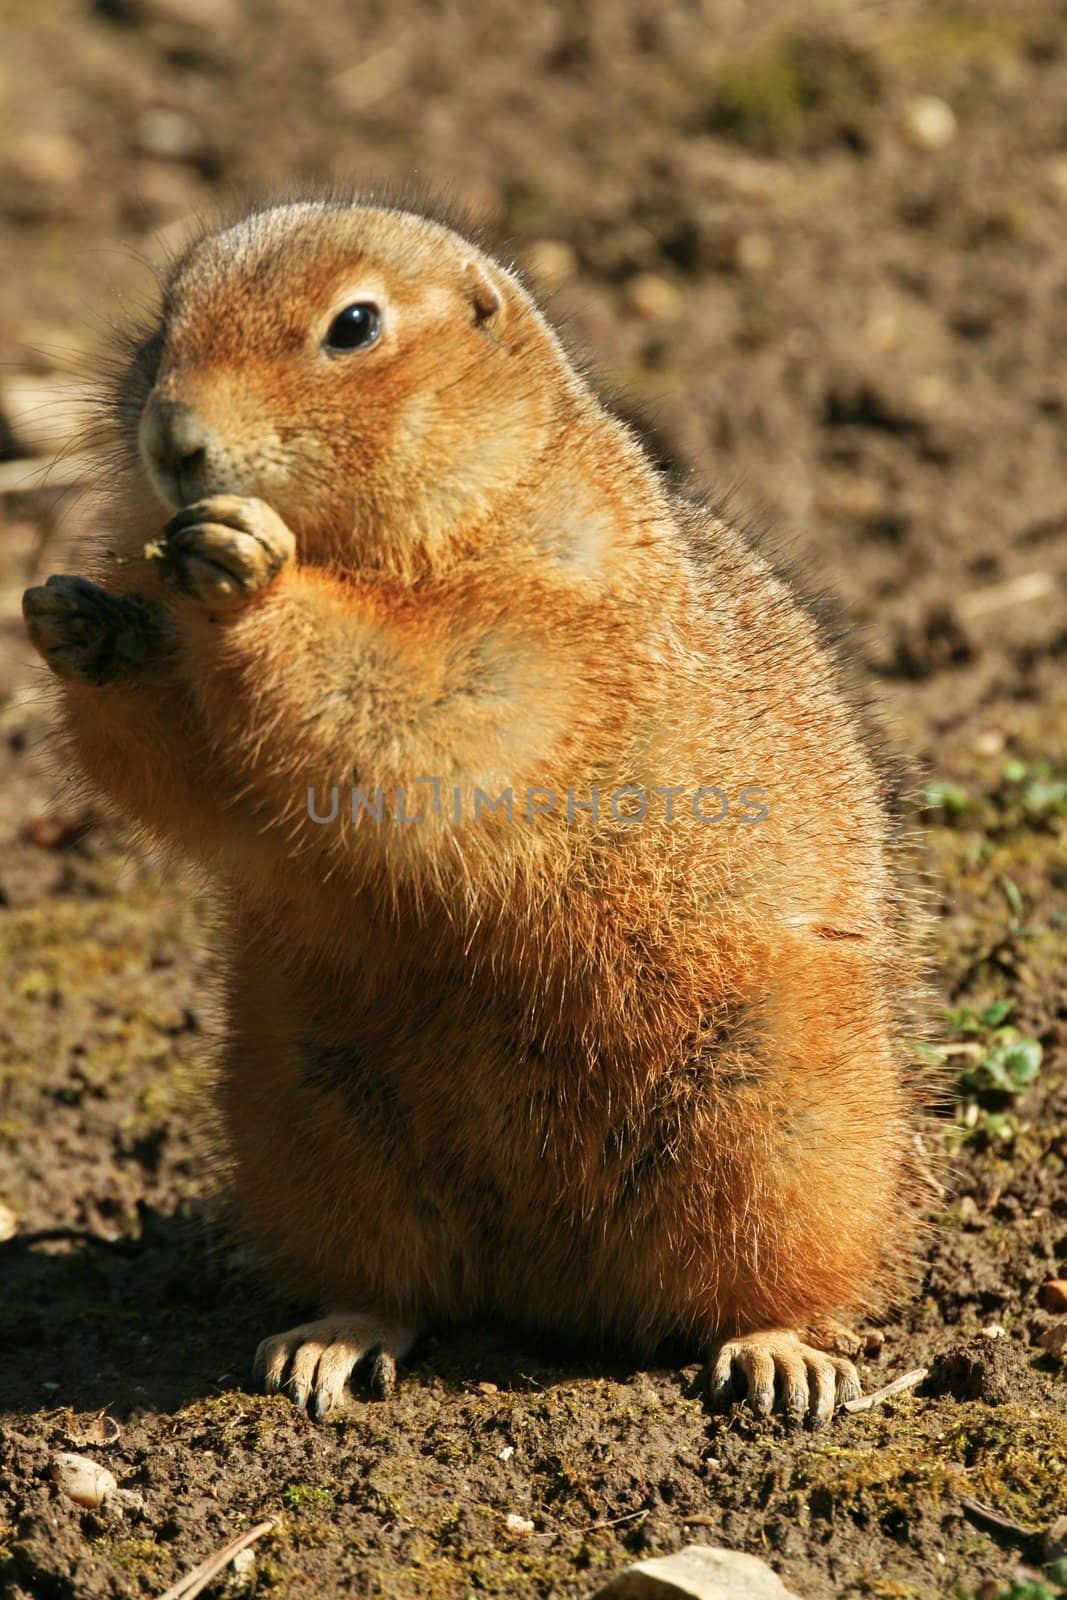 A ground squirrel standing and eating his food